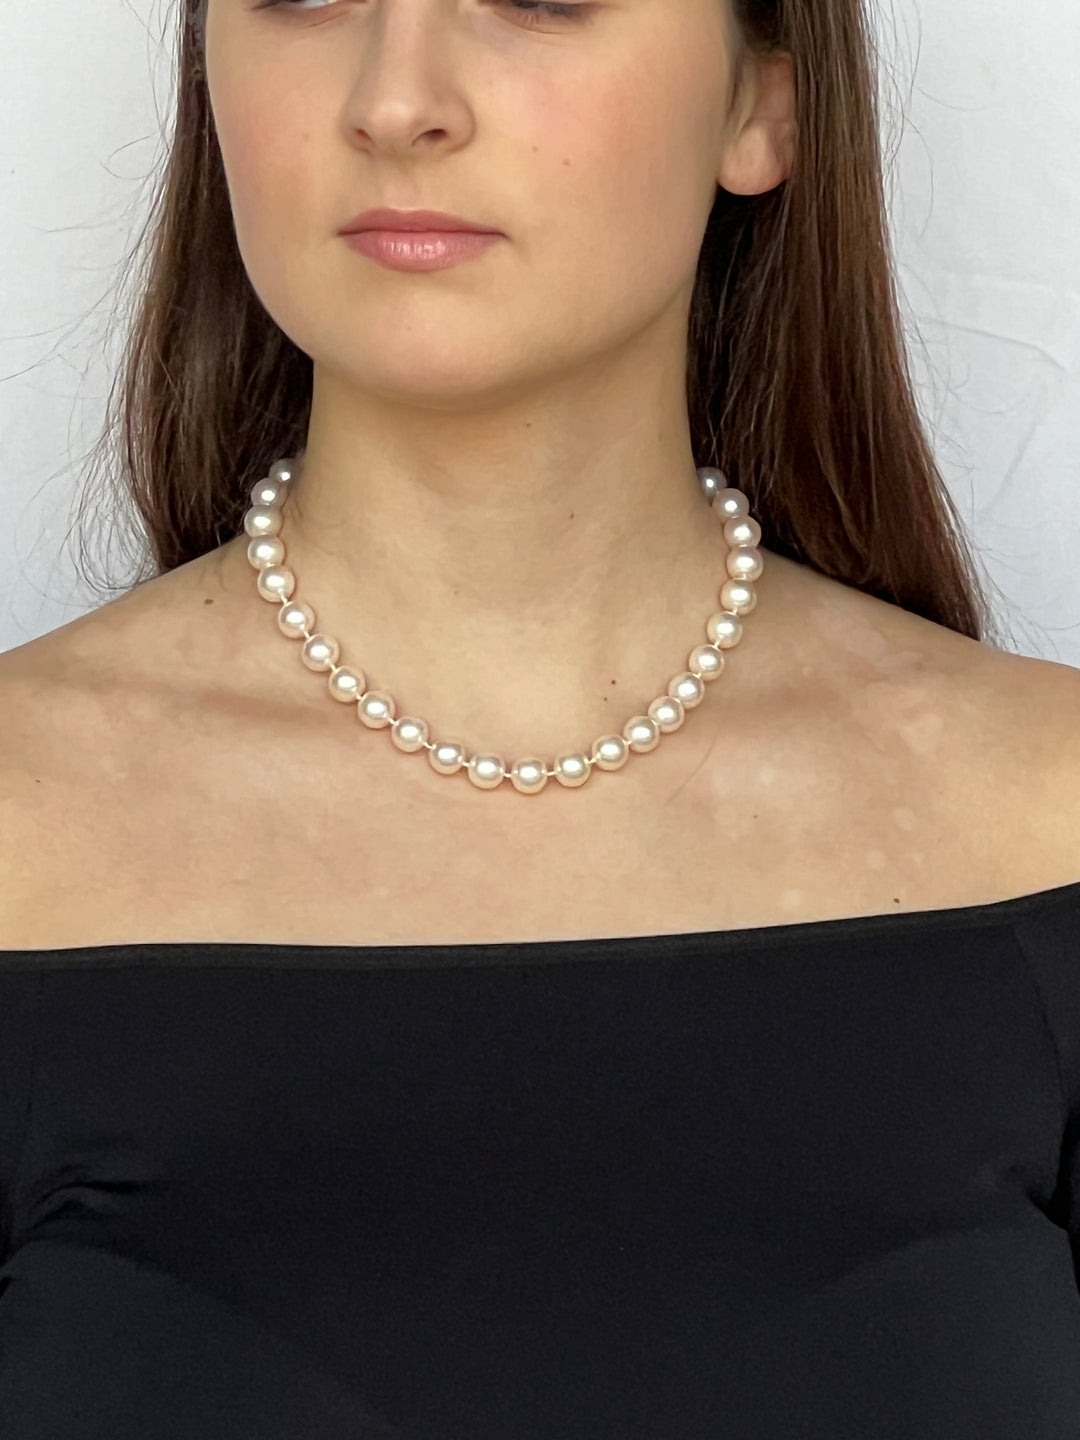 South Sea Cultured Pearl and Diamond Bow Necklace